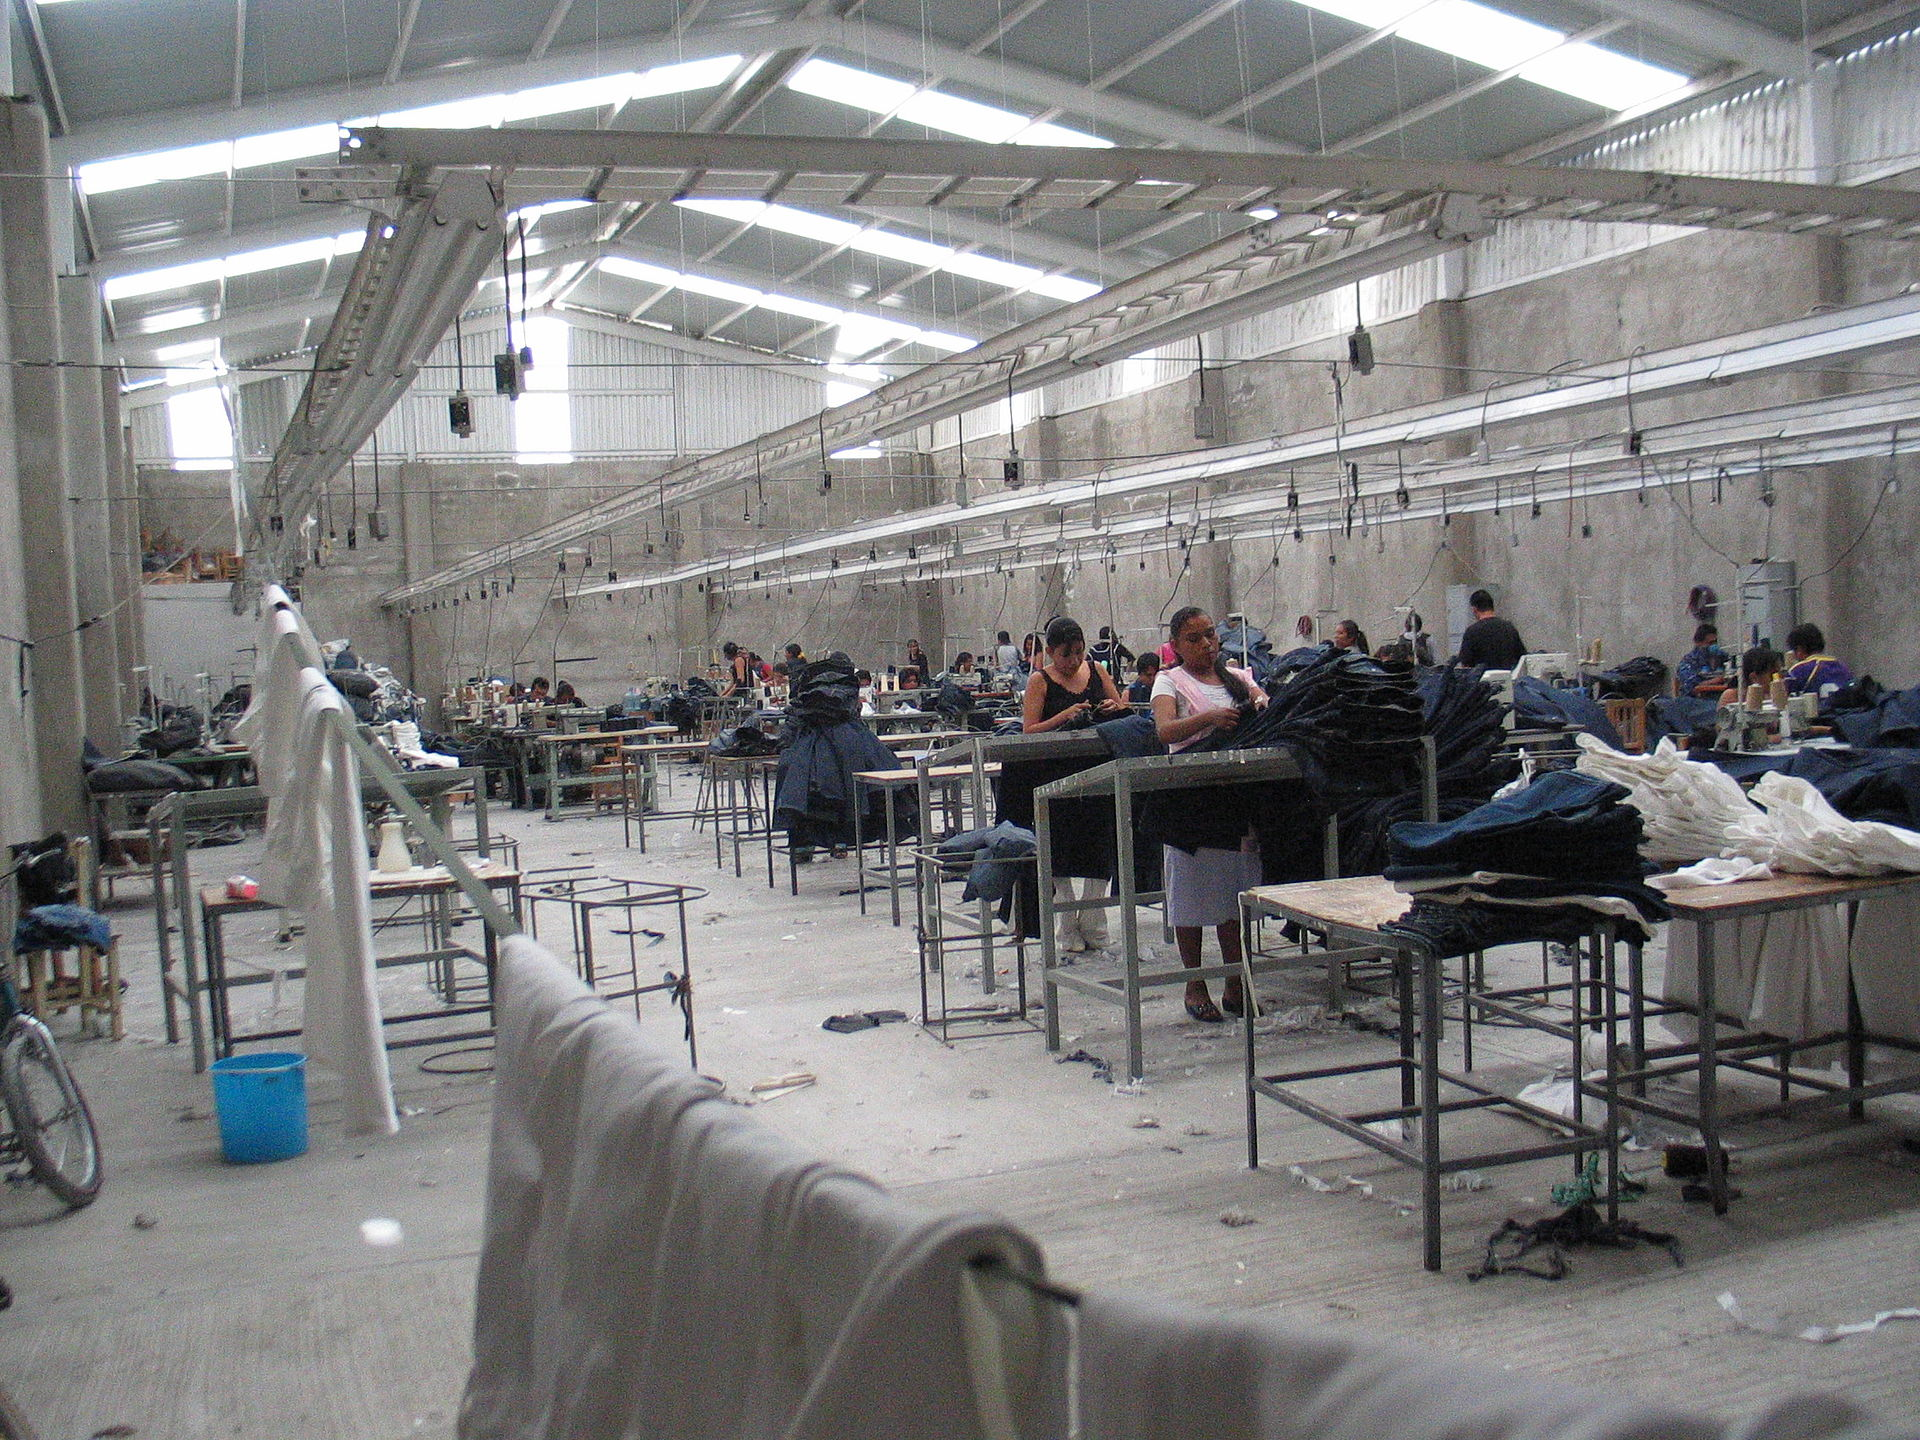 Image shows the inside of a garment factory in Mexico with people standing at tables working with fabric